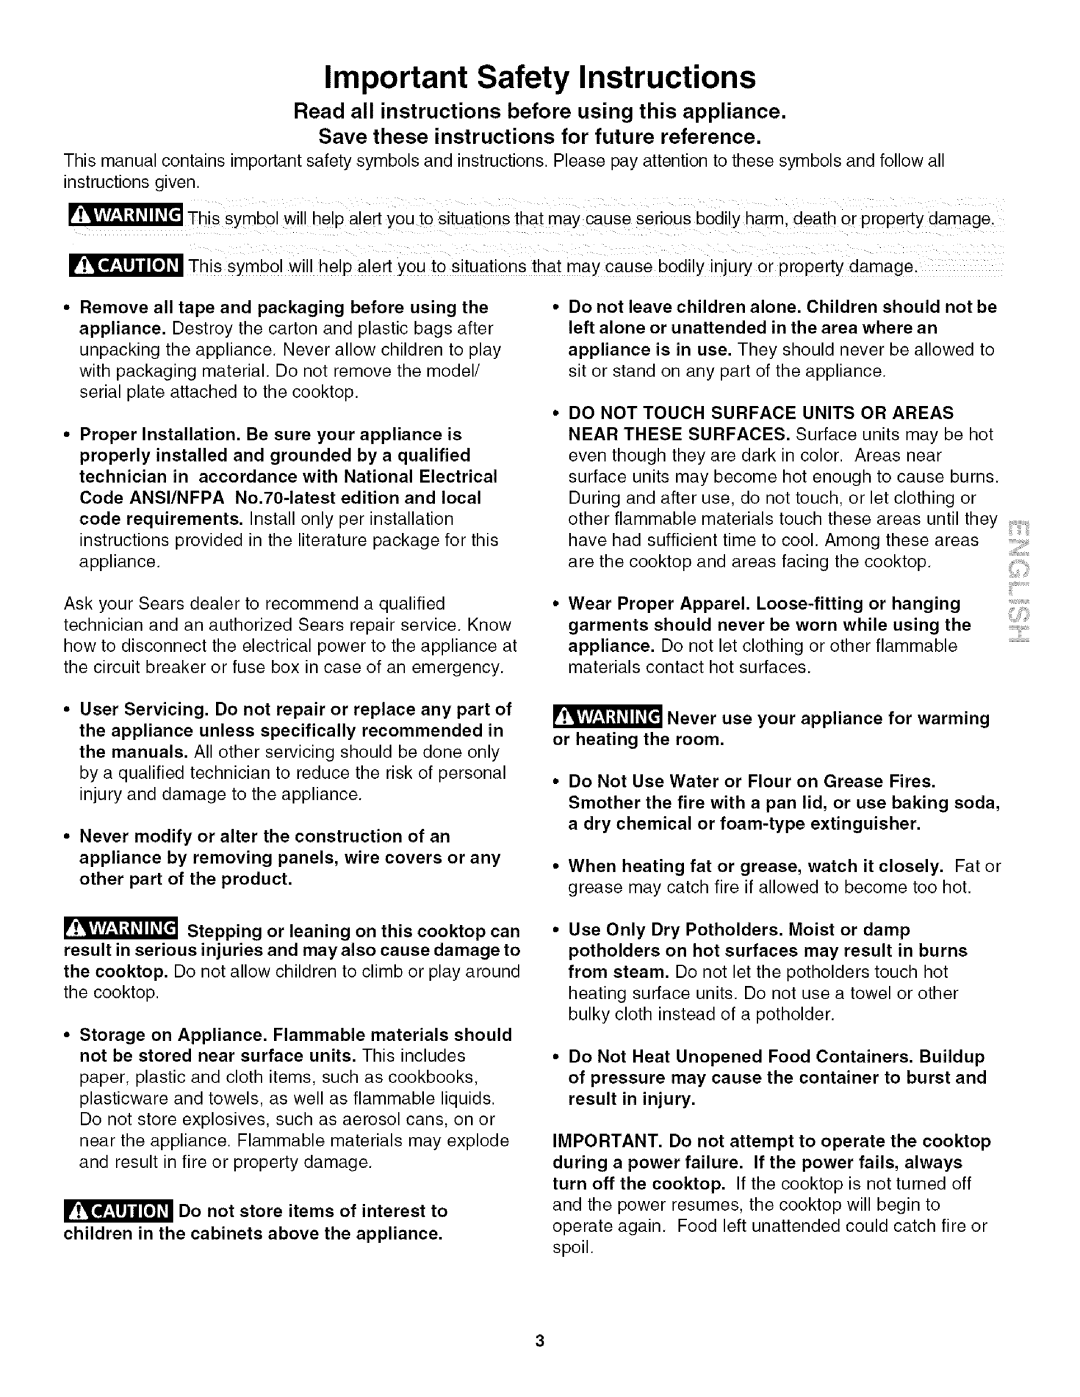 Kenmore 4272, 790 manual Important Safety Instructions, Read all instructions before using this appliance 